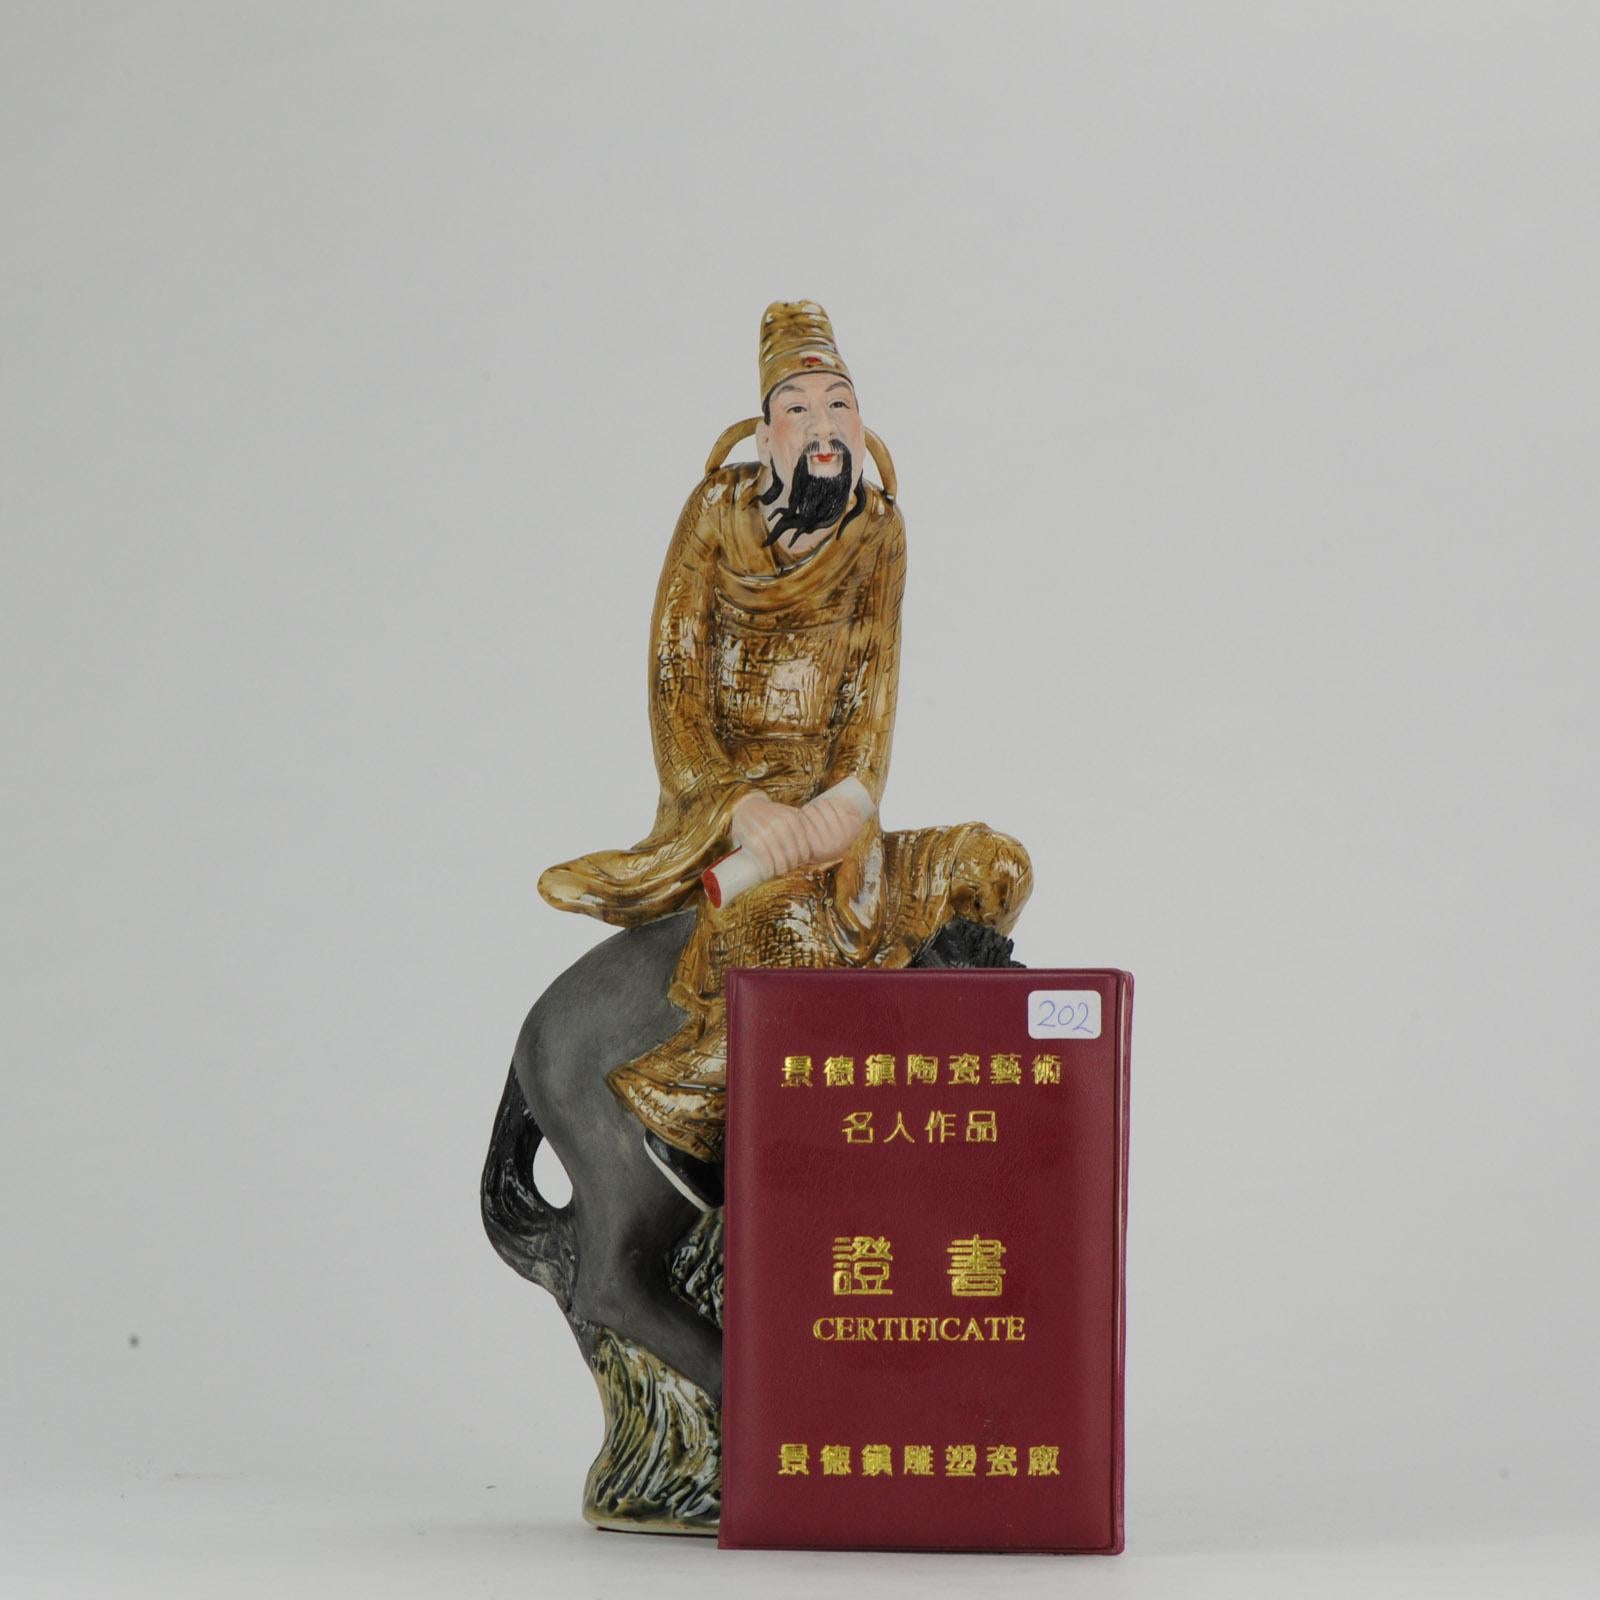 A polychrome porcelain sculpture of a man with scroll, sitting on a horse. Dated 1998. Created by Xu Jian Jian (1965), Member of Jingdezhen Artists Association. Marked with seal mark. China, Jingdezhen. With certificate.

Provenance: bought in